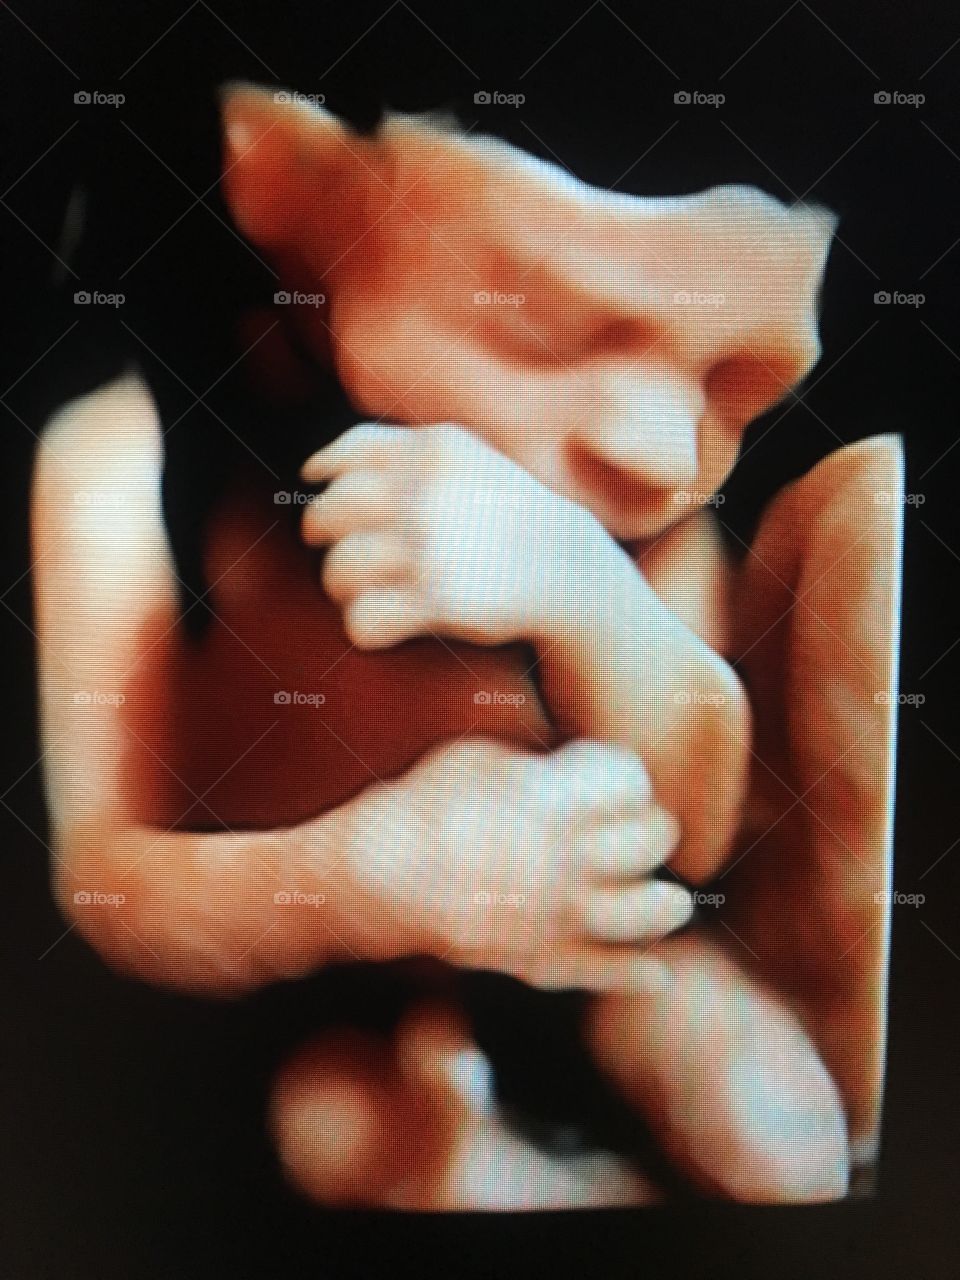 3D Ultrasound Image of a Baby